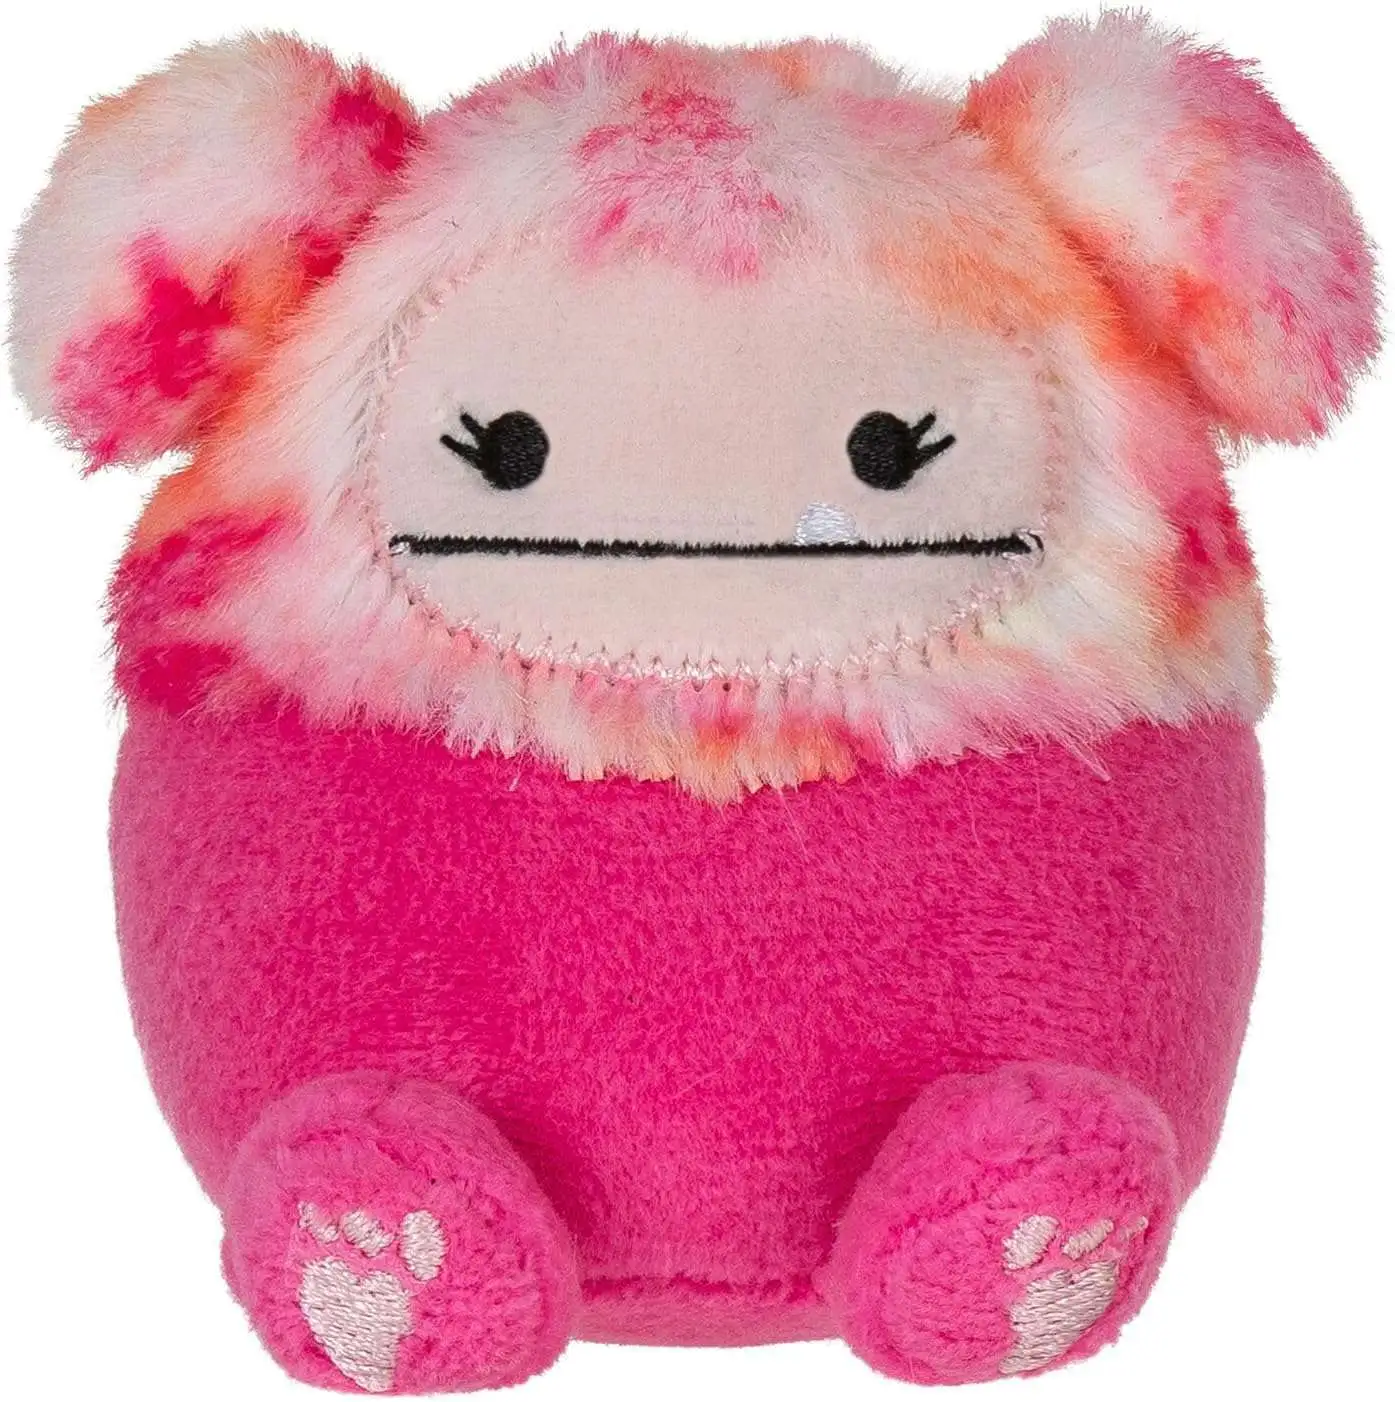 Squishmallows - How perfect is this adorable Squishville Mini